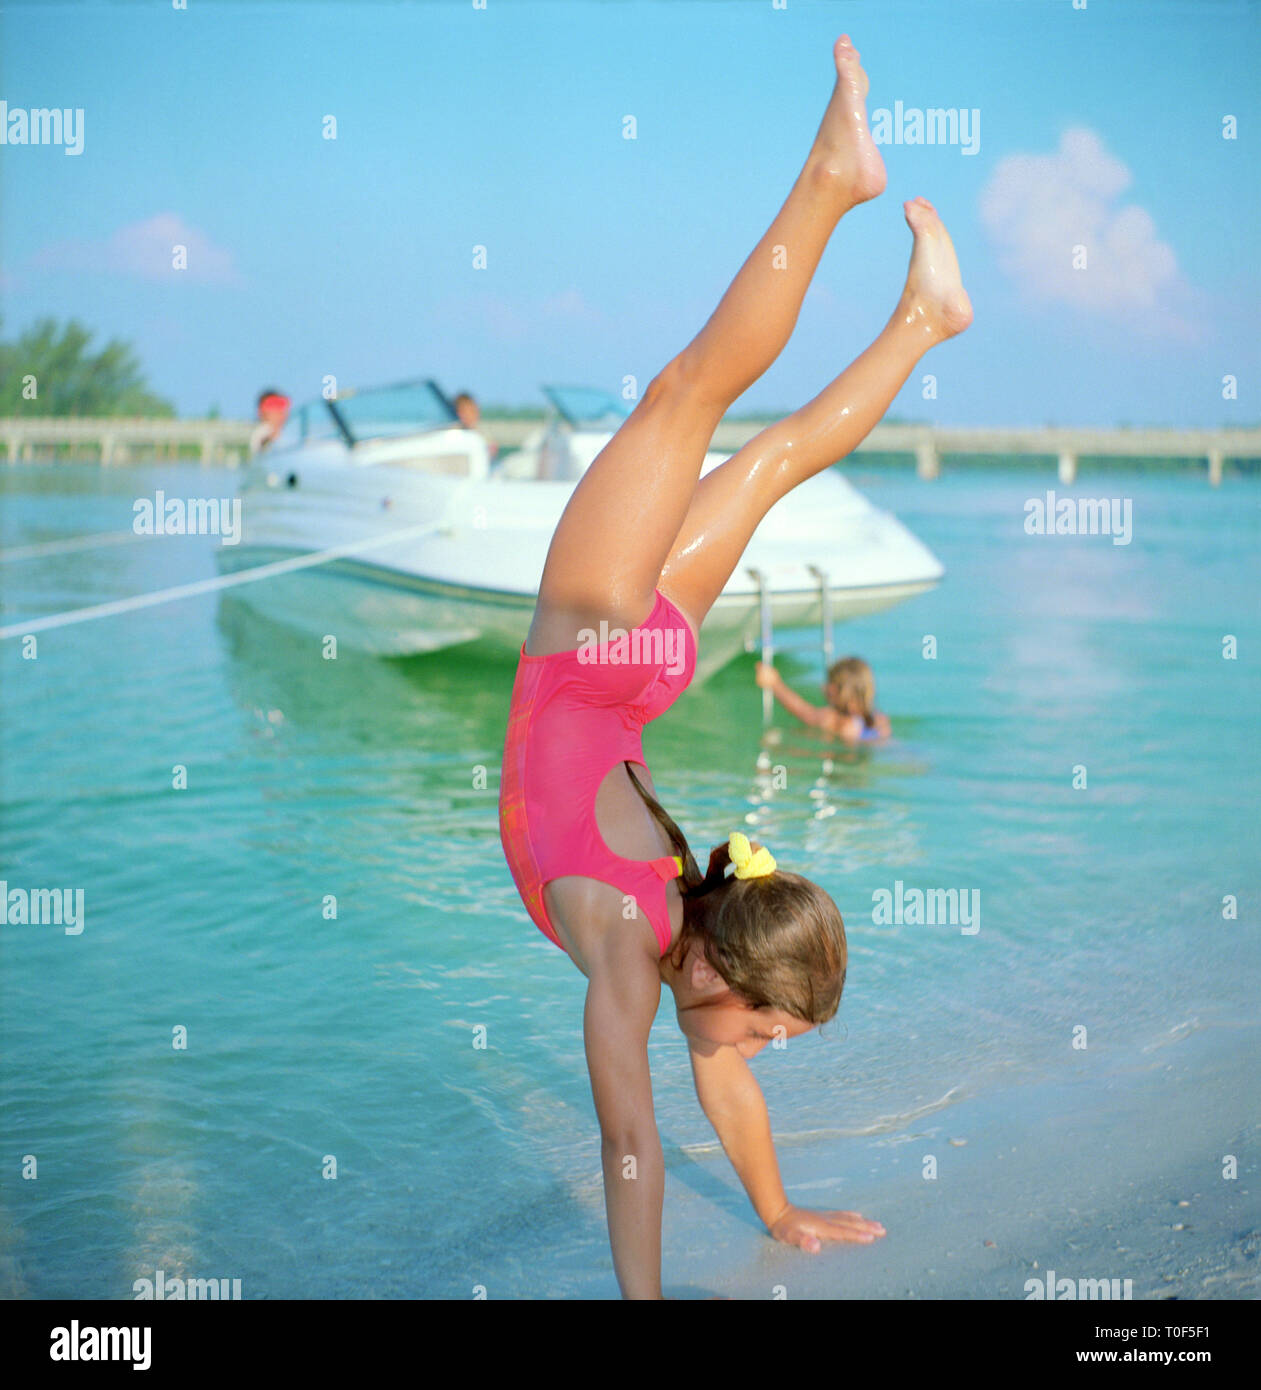 A girl is doing a handstand. Stock Photo